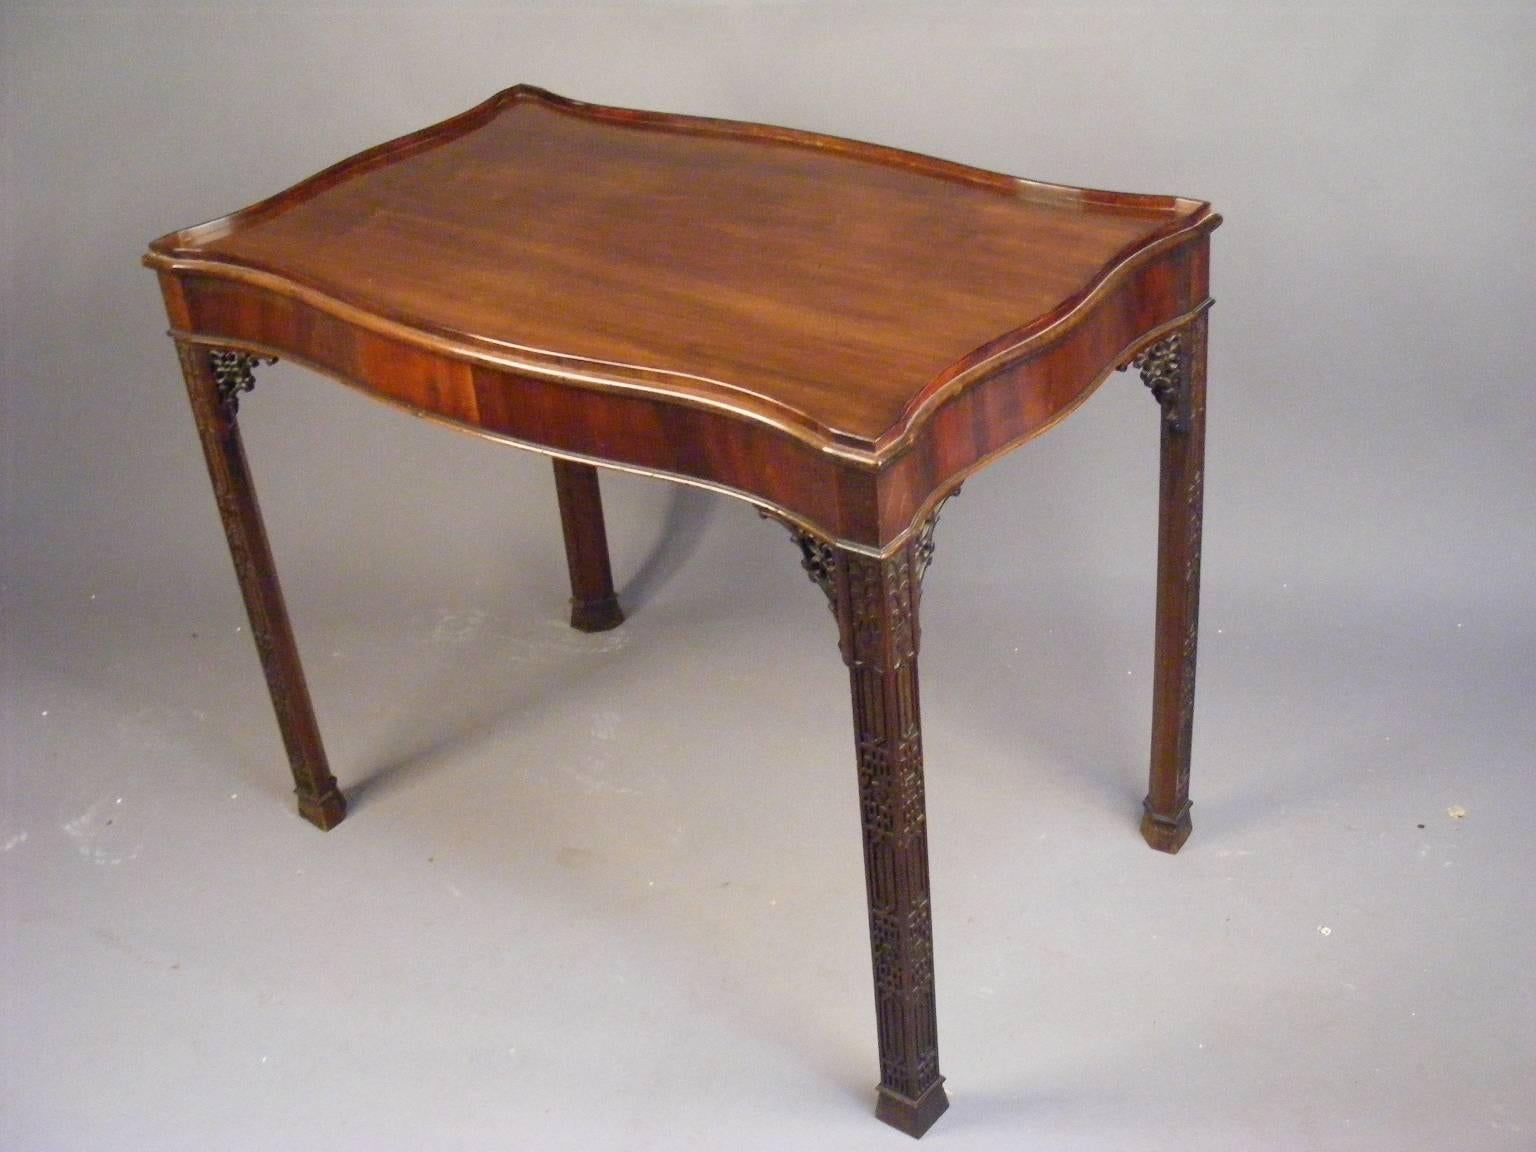 A superb and rare mahogany serpentine centre table, circa 1890 in the classical revival style.

This table is a rare find indeed. It is beautifully finished on four sides all of serpentine shape. The top with its raised gallery and cross banded